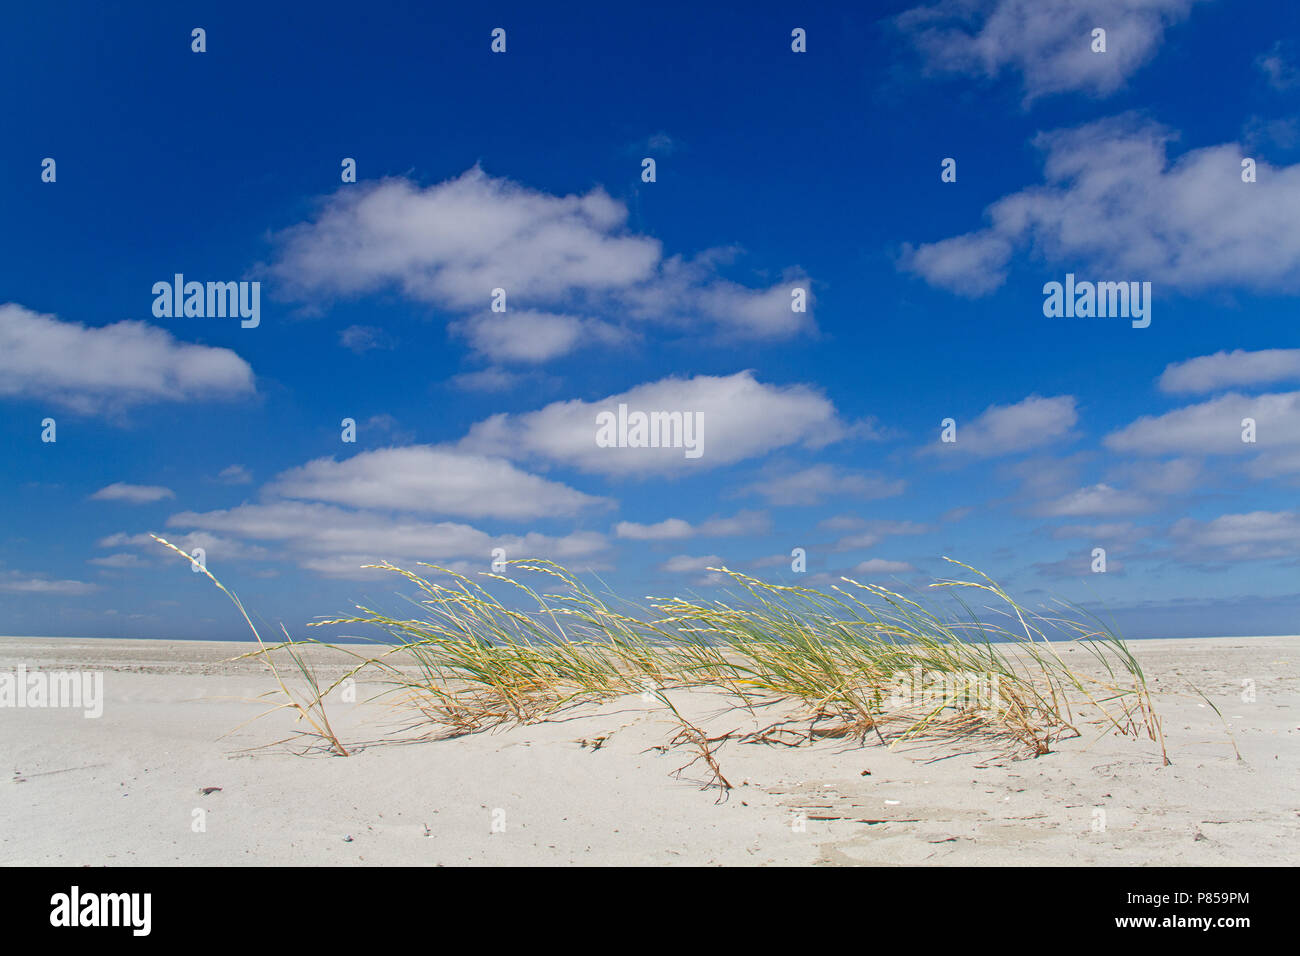 Pioneer vegetation: Sand couch growing in the barren environment of the vast beach of the Dutch island Schiermonnikoog Stock Photo